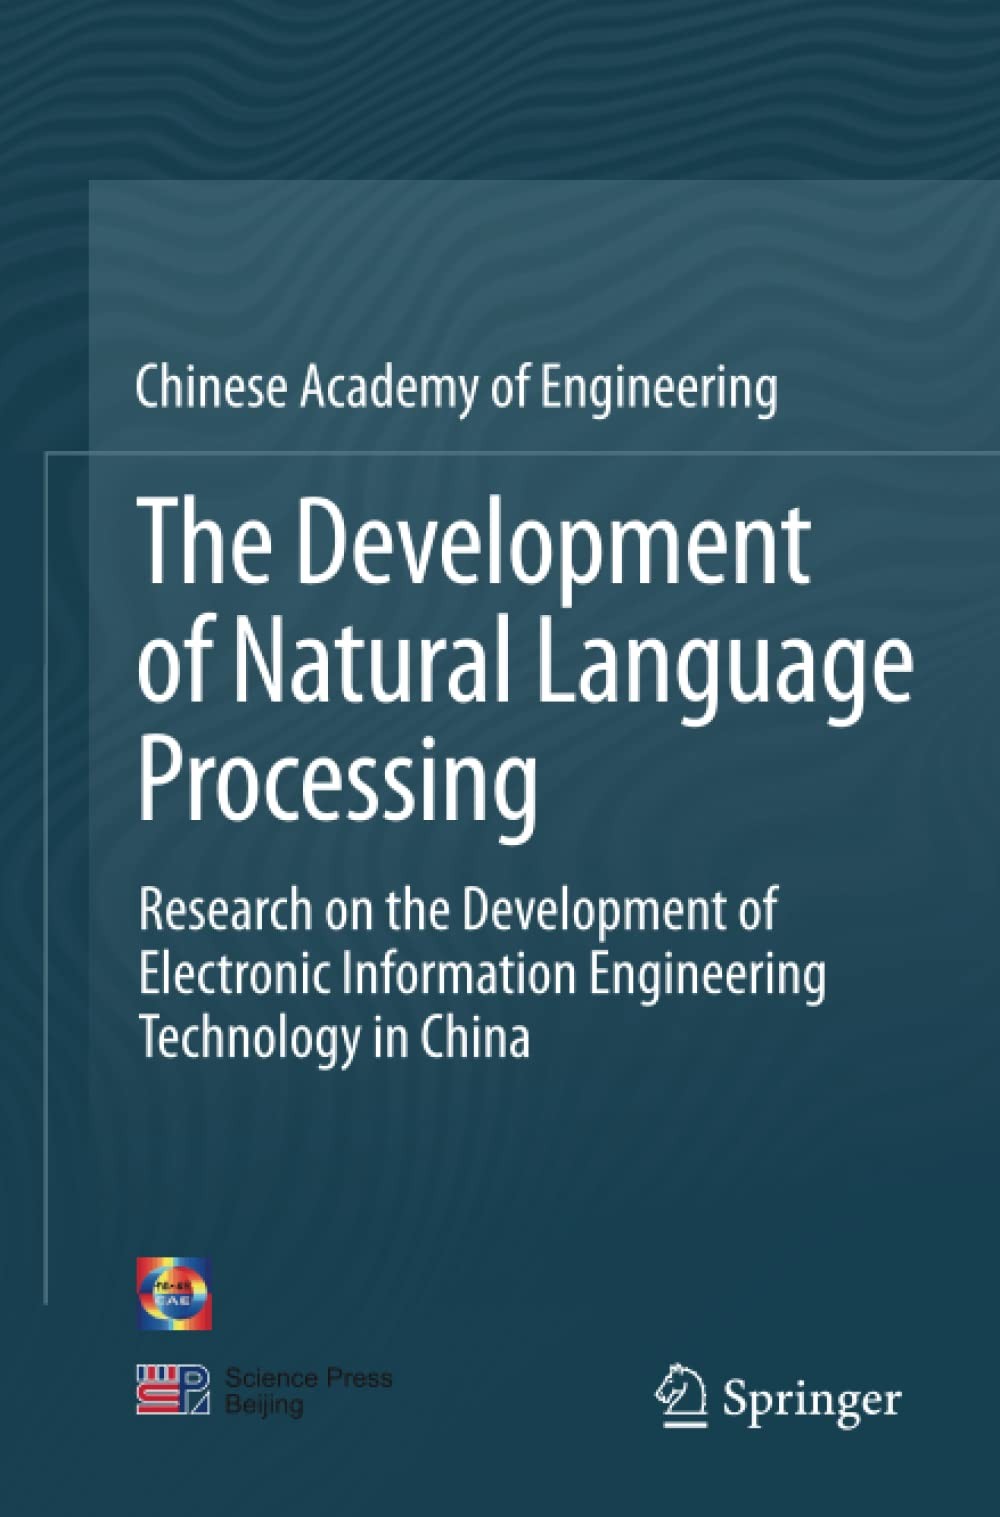 The Development of Natural Language Processing: Research on the Development of Electronic Information Engineering Technology in China